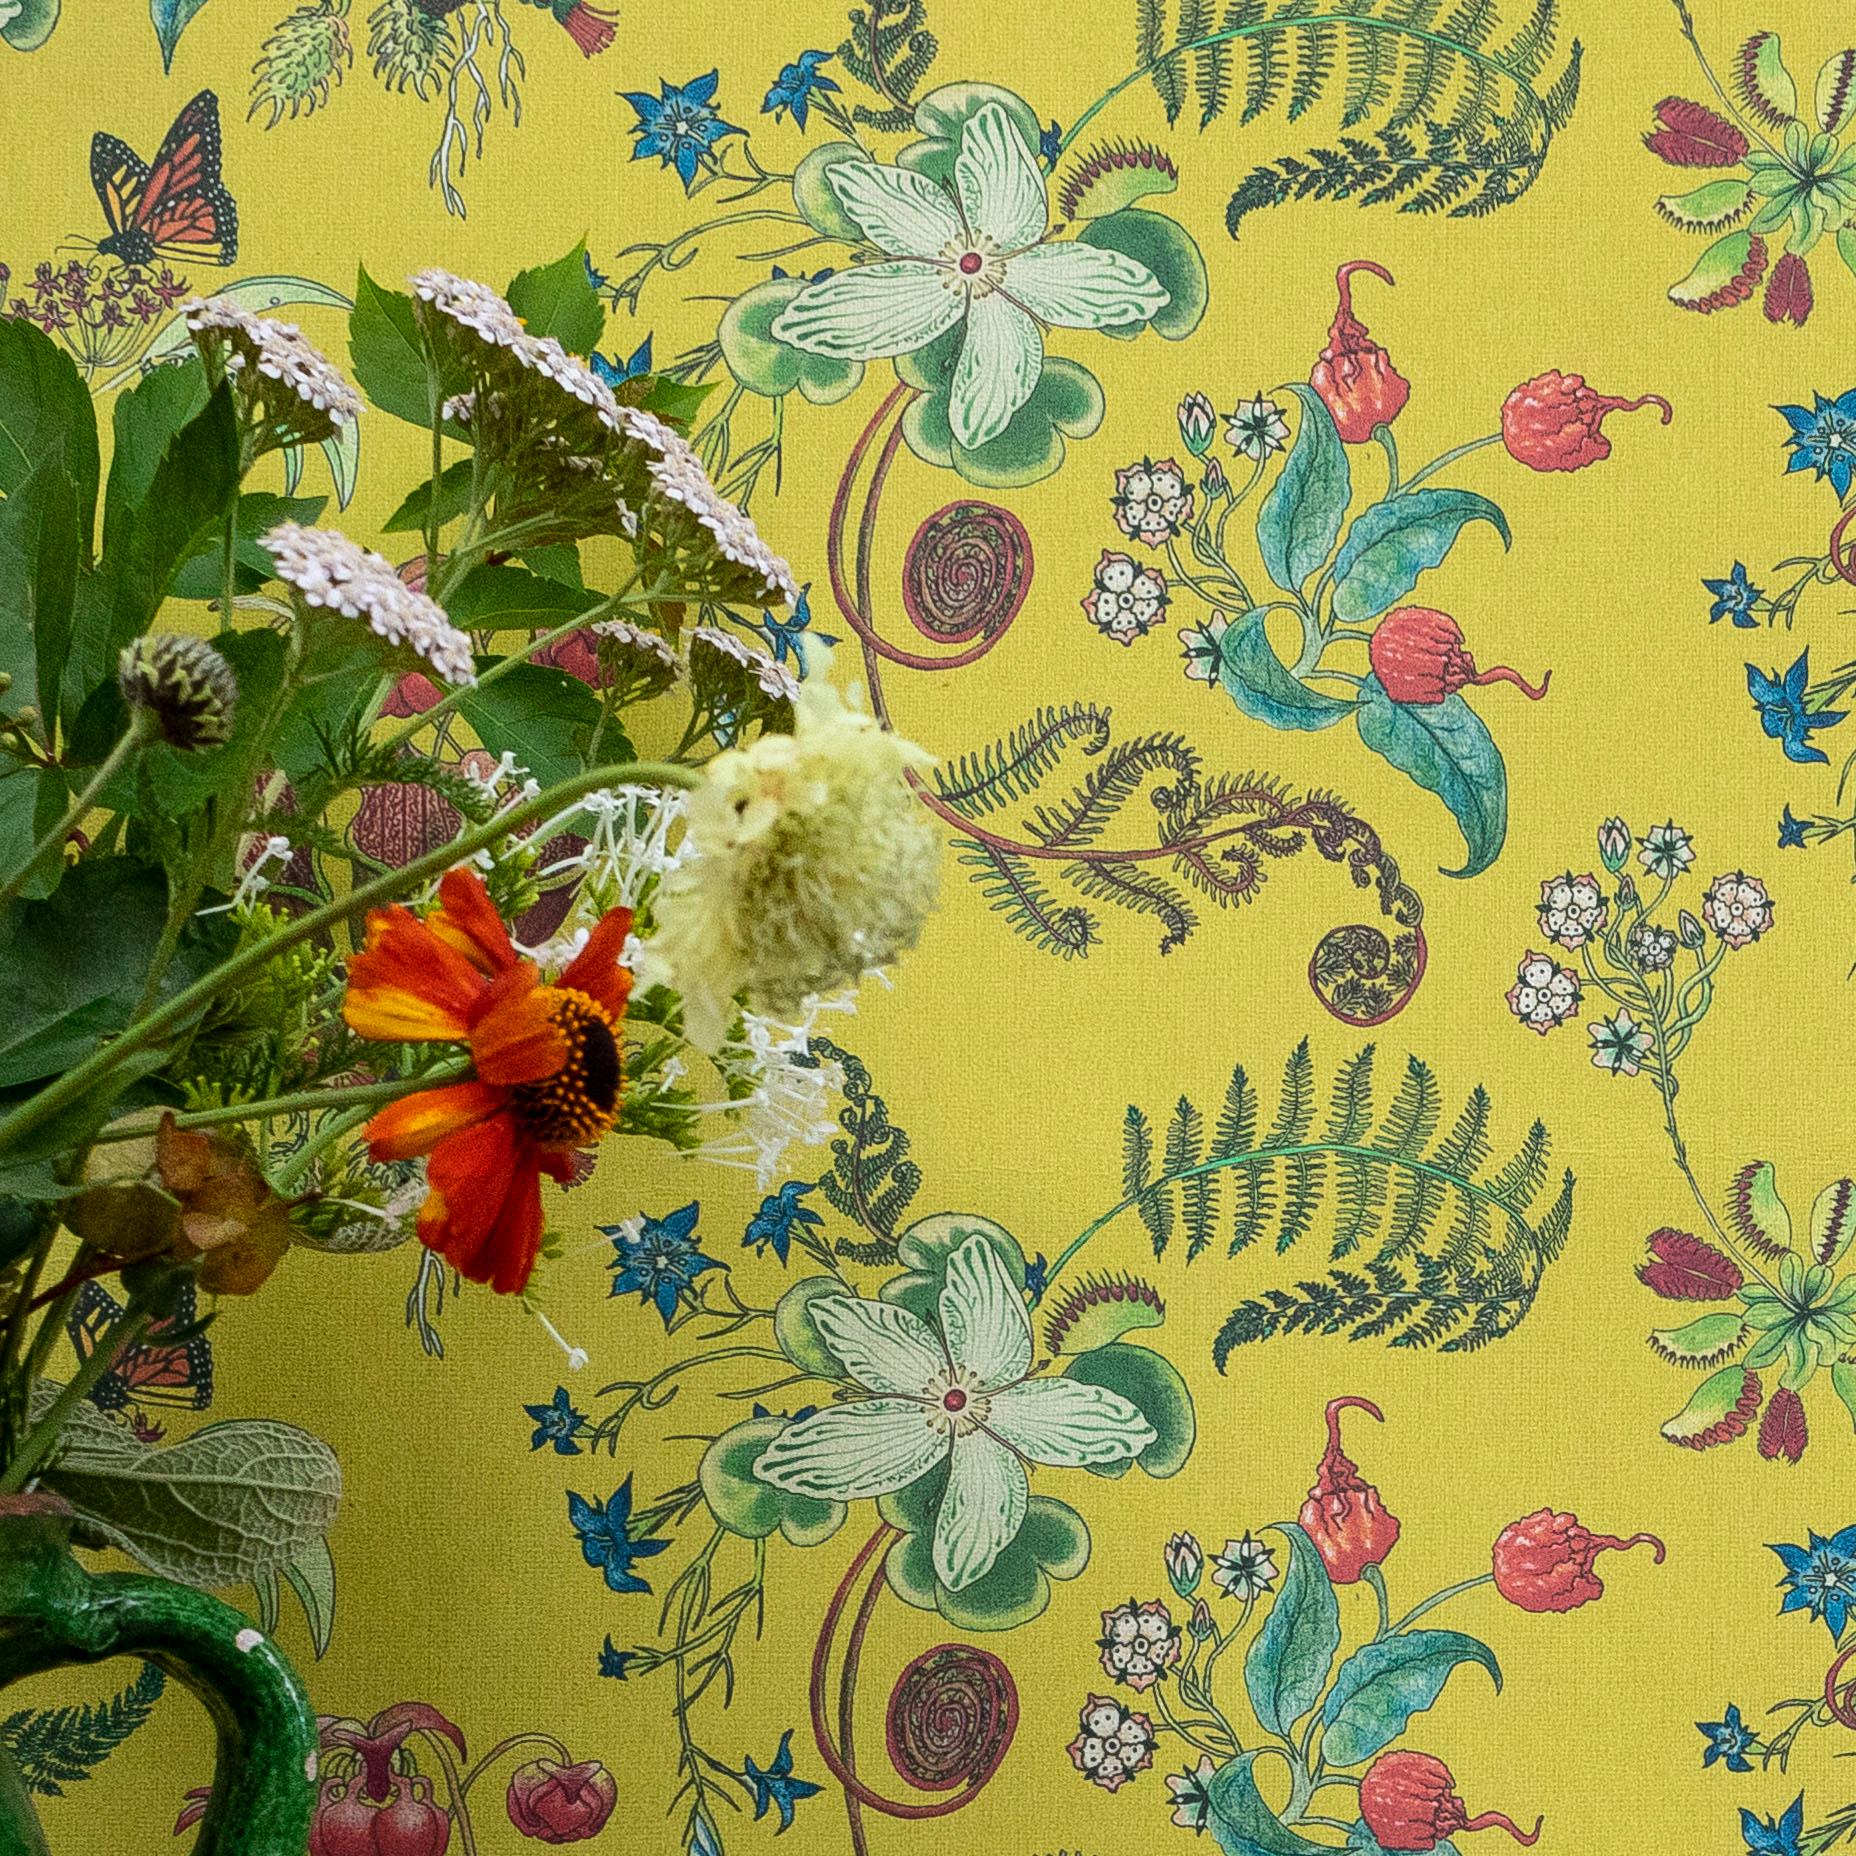 Collection: Carolina Posies
Product Code: 26C
Color: Cornbread
Roll dimensions: 70cm x 10m (27.6in x 10.9yards)
Area: 7sq.m (8.4 sq.yards)
Pattern repeat: 17.5cm (6.9in) Half Drop
Wallpaper: Non-woven 147gsm Uncoated. 
Fire rating: Fire certified